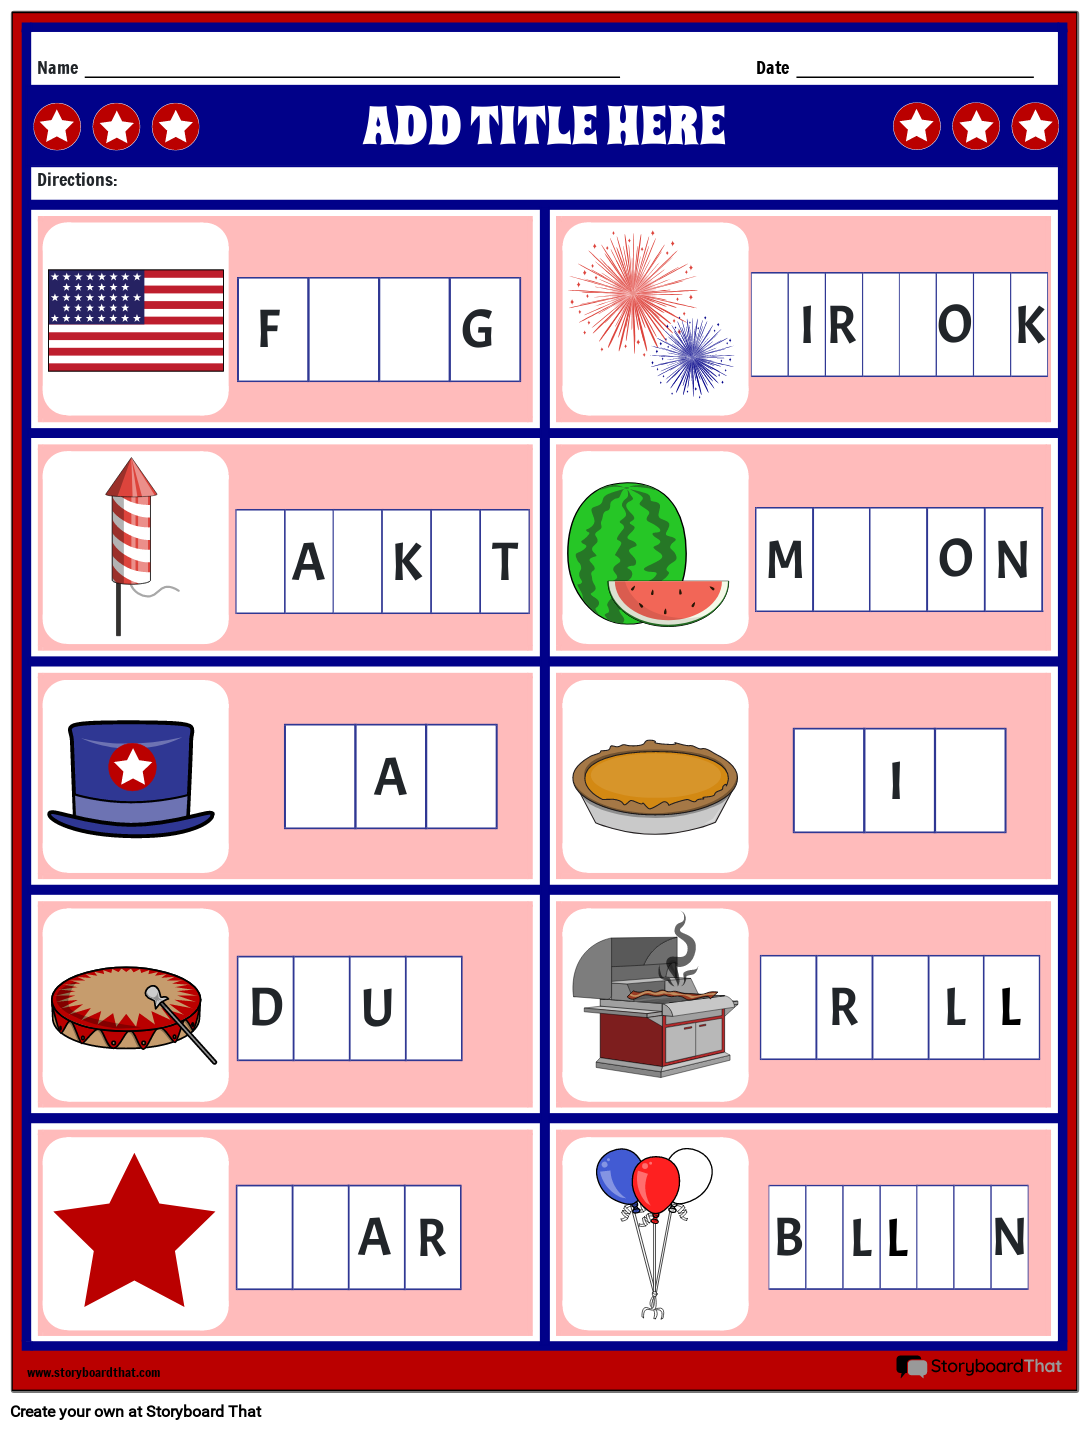 Fill-in the Missing Letter 4th of July Worksheet